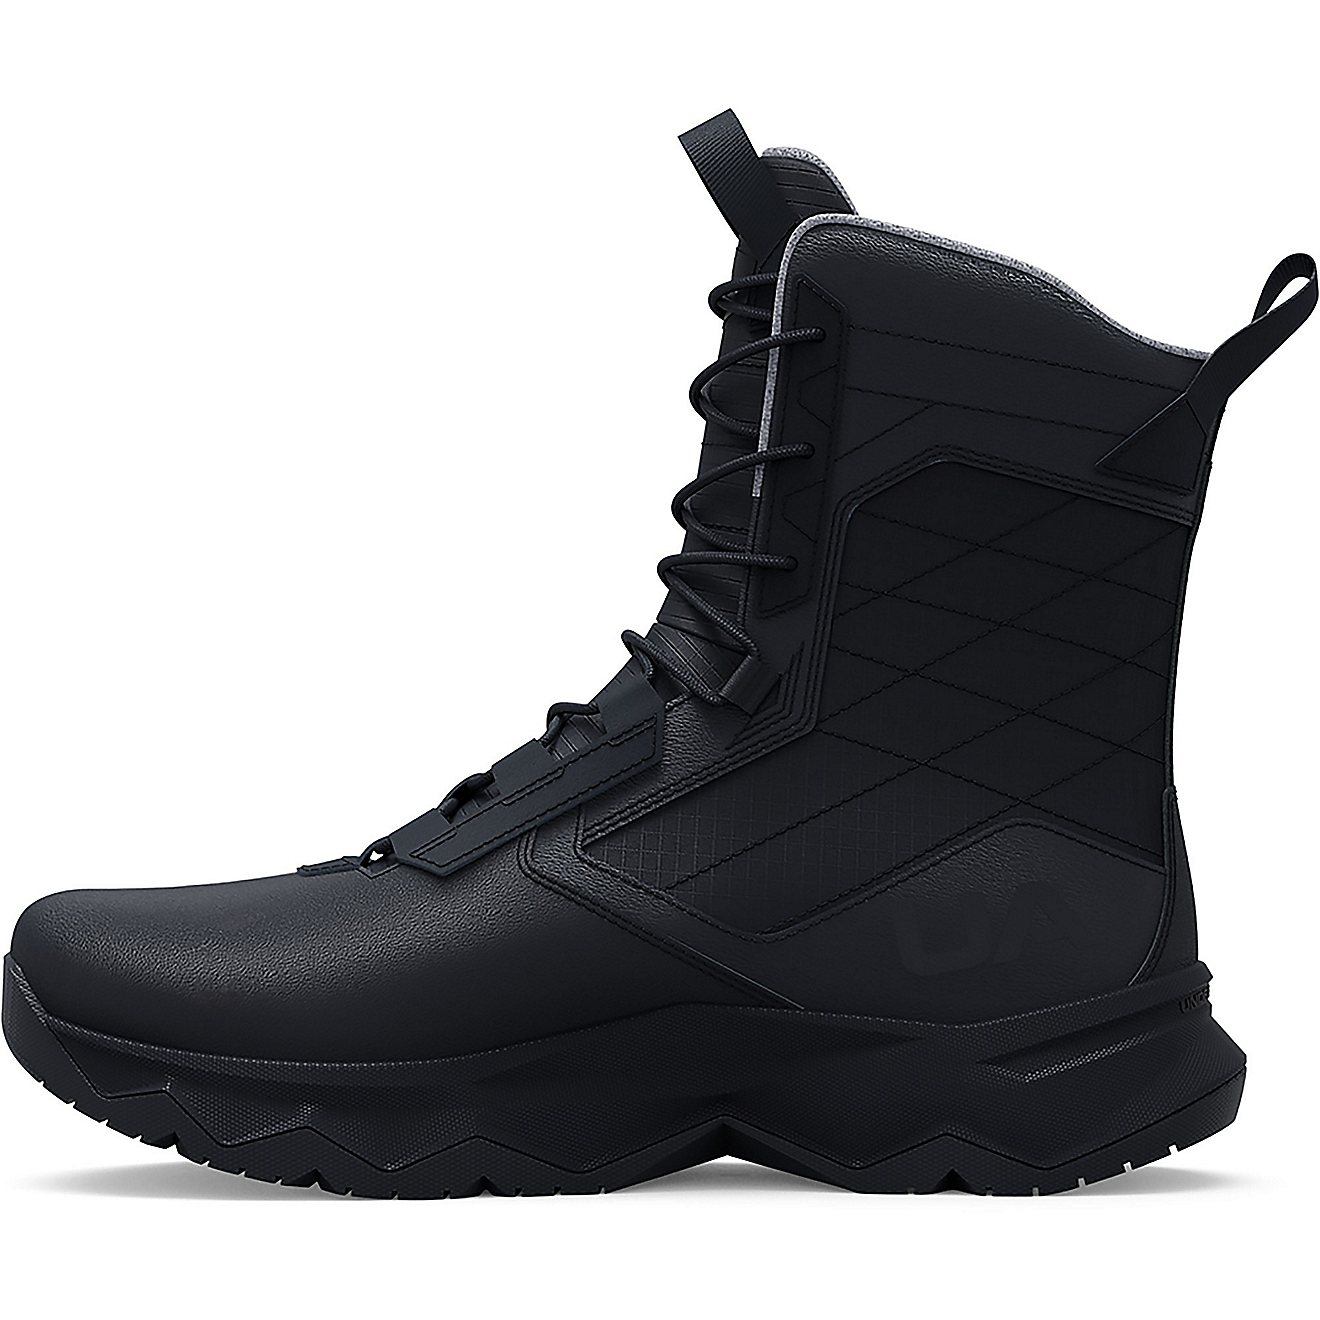 Under Armour Men's Stellar G2 Tactical Boots                                                                                     - view number 2